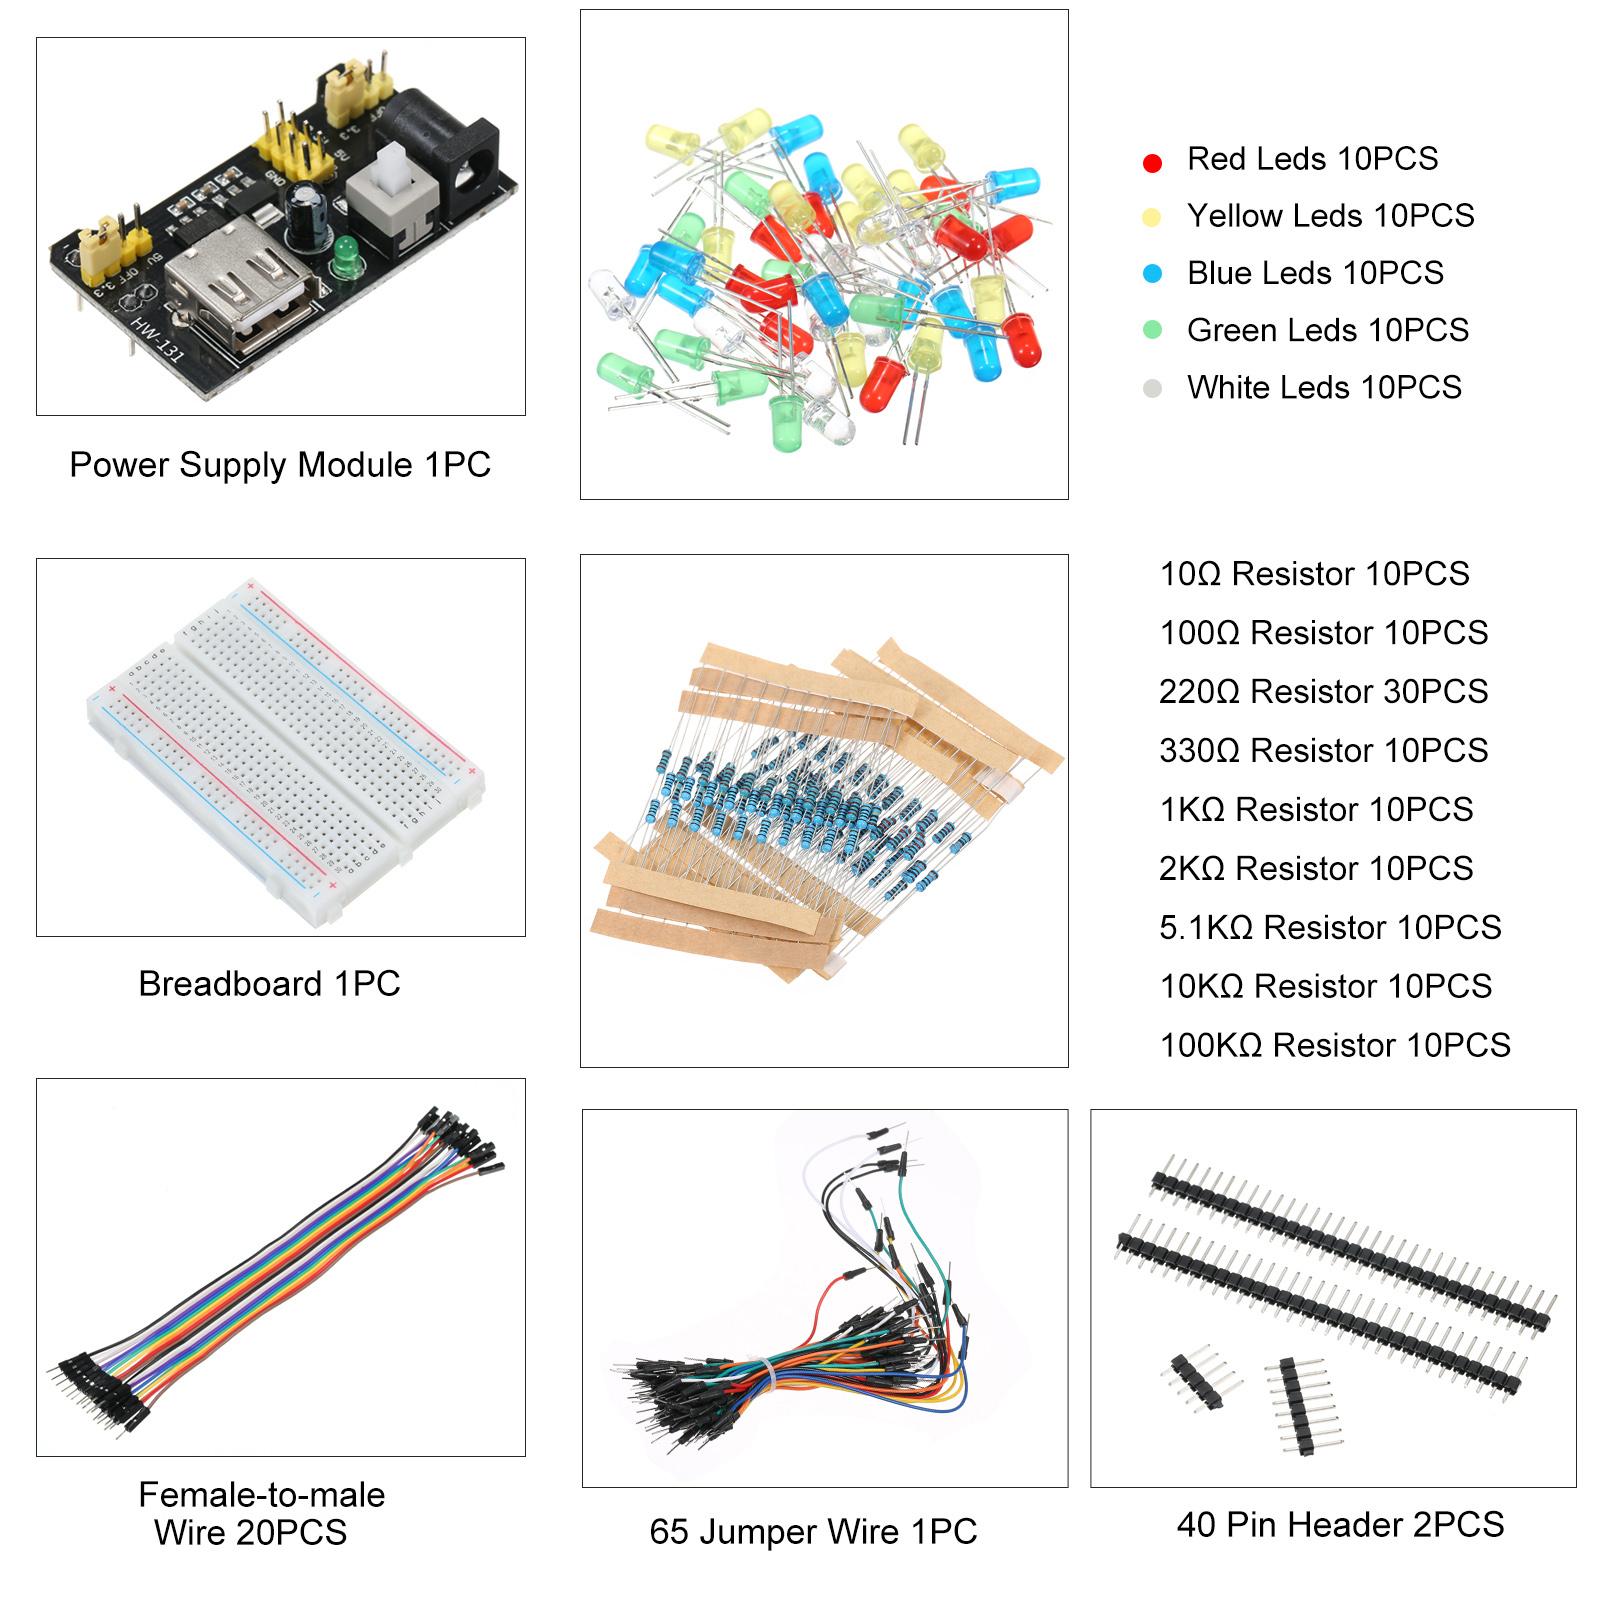 TOMTOP JMS Electronic Fun Kit Bundle with Breadboard Cable Resistor Capacitor Leds Potentiometer Replacement